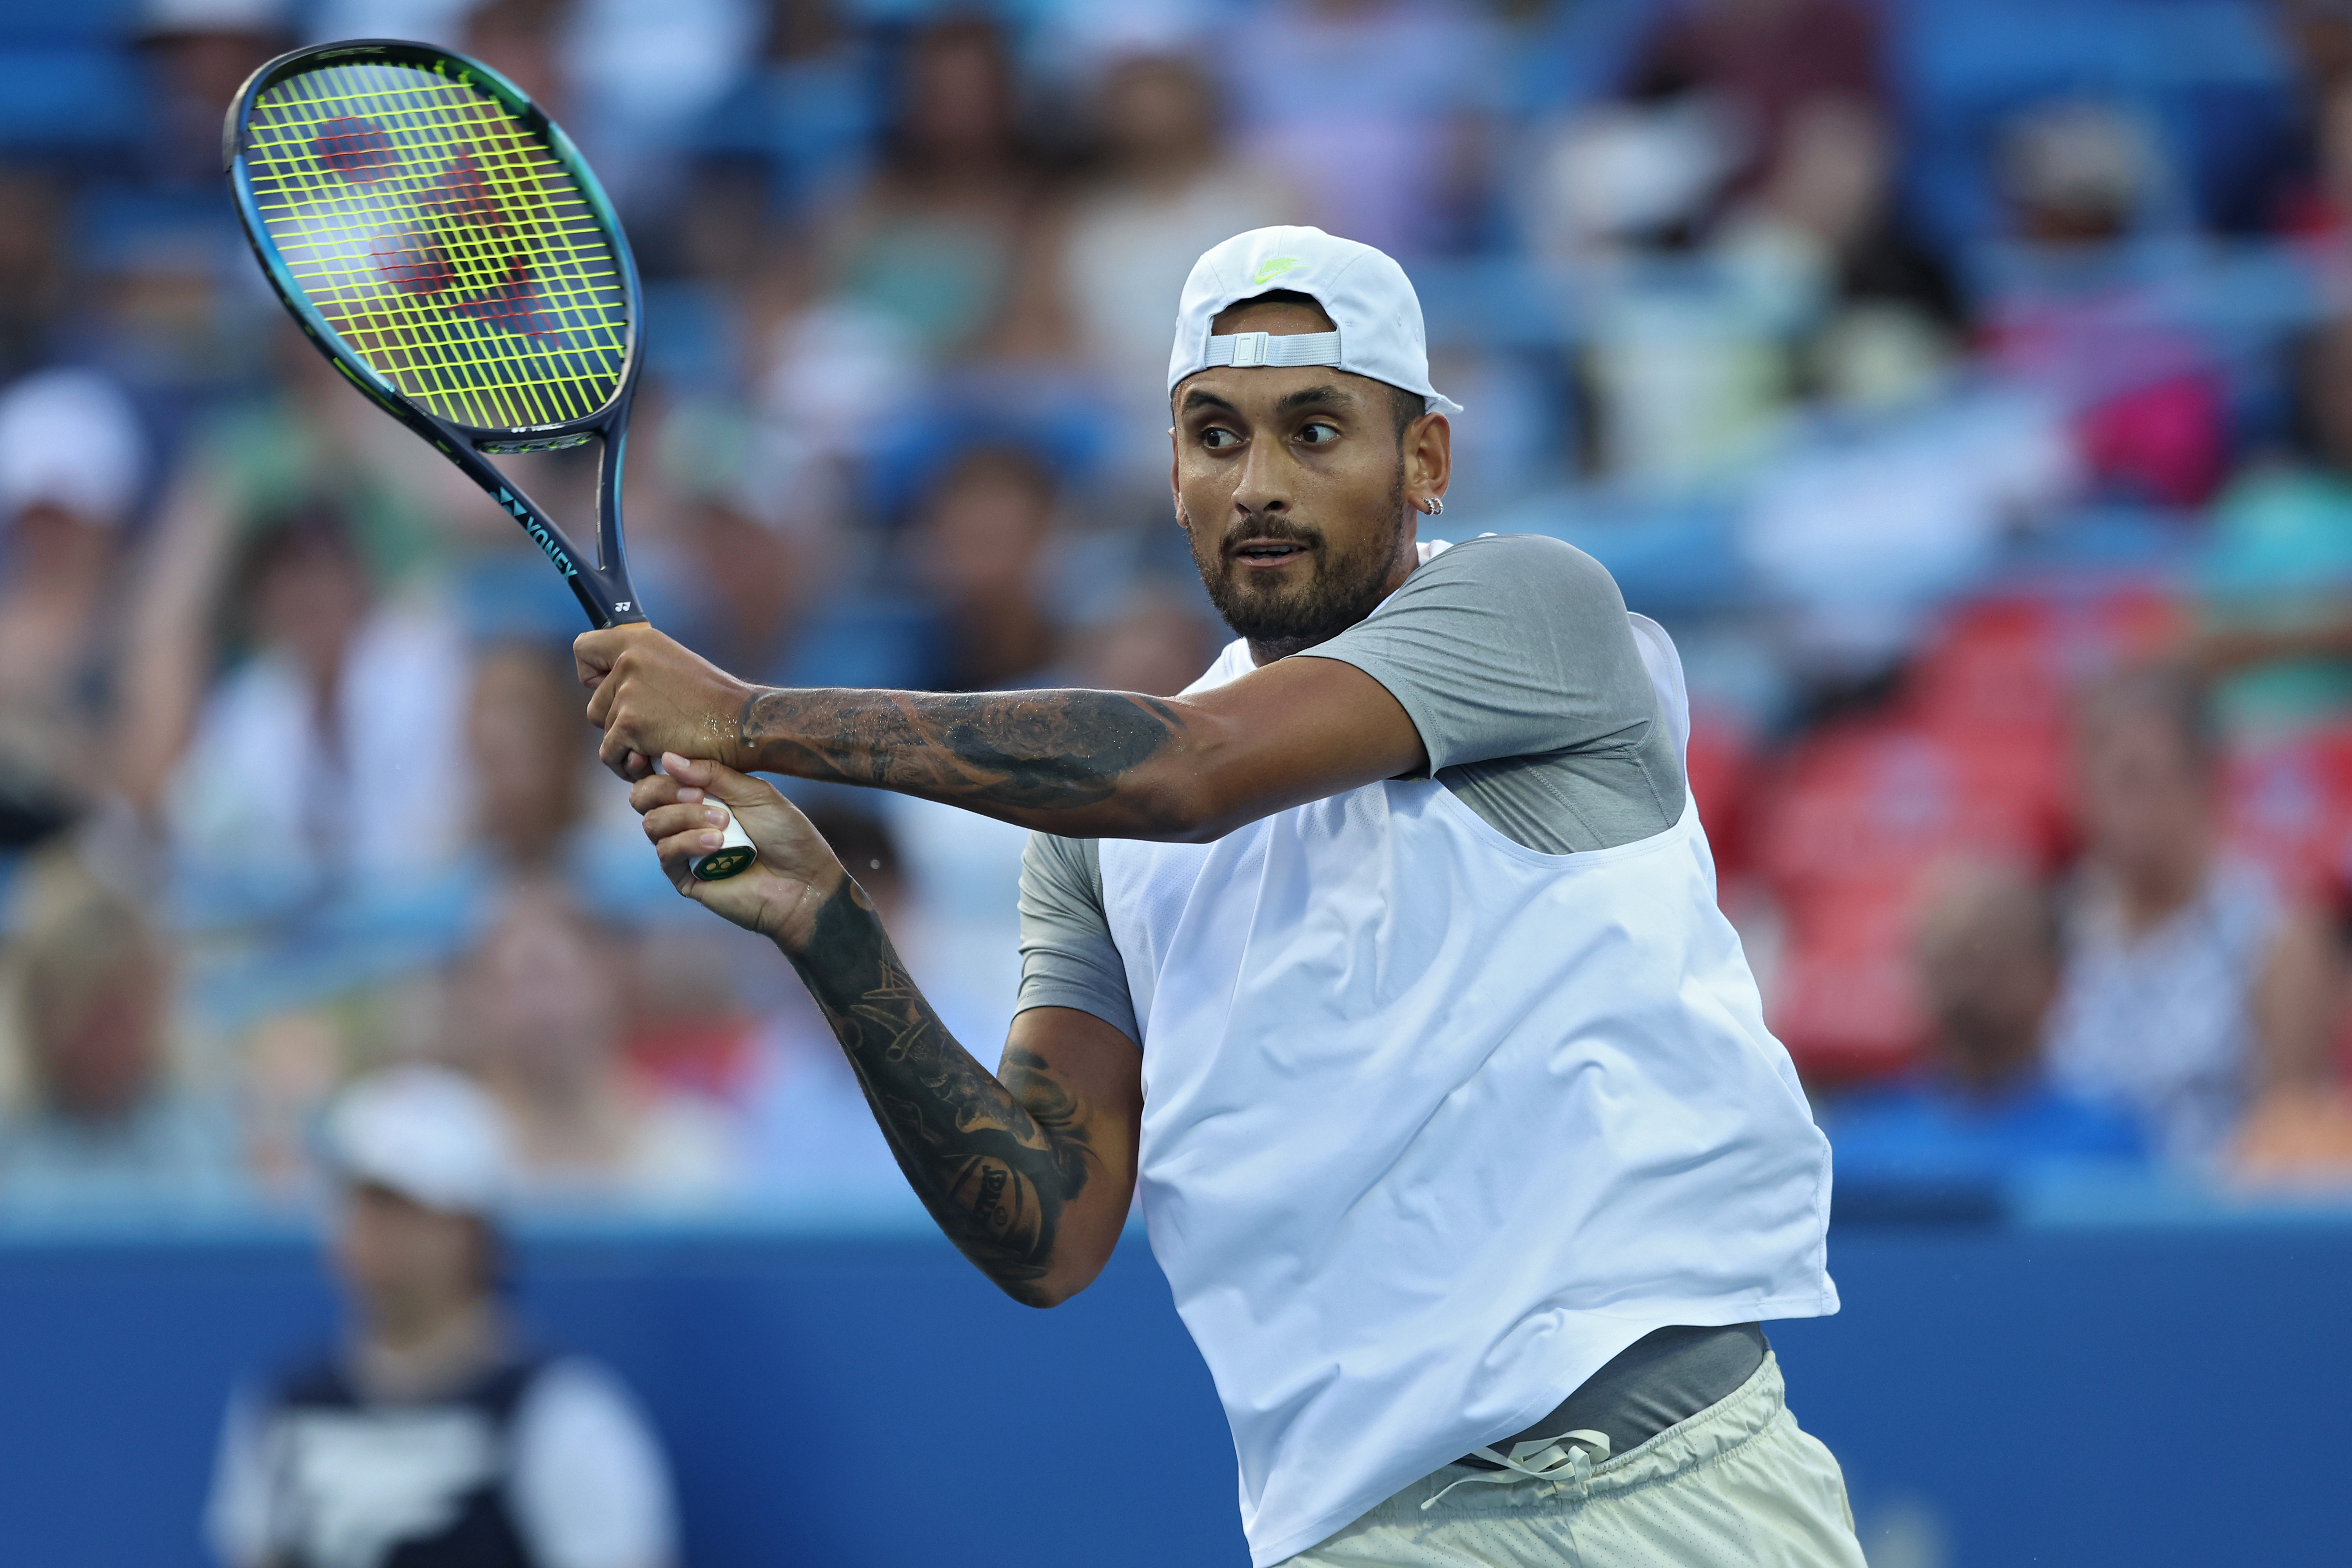 Nick Kyrgios of Australia returns a shot to Mikael Ymer of Sweden in the Men's Semifinal during Day 8 of the Citi Open at Rock Creek Tennis Center on August 6, 2022 in Washington, DC. (Photo by Patrick Smith/Getty Images)